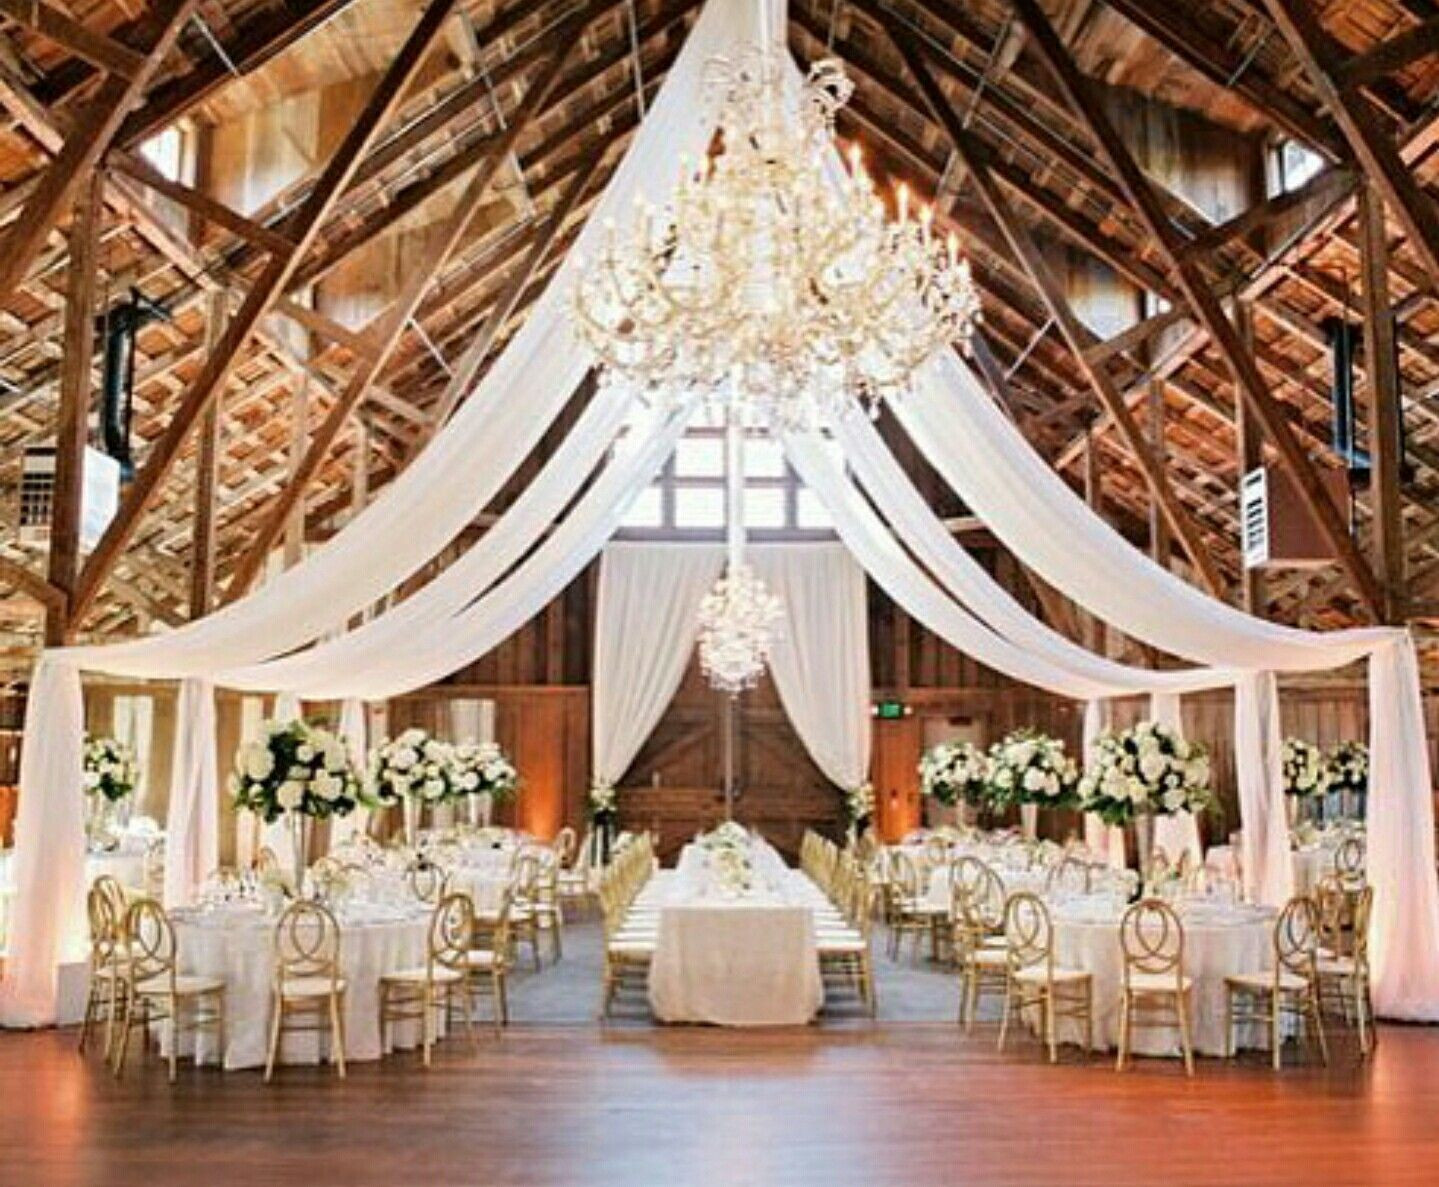 Engagement Party Location Ideas
 Elegant wedding in a rustic location in 2019